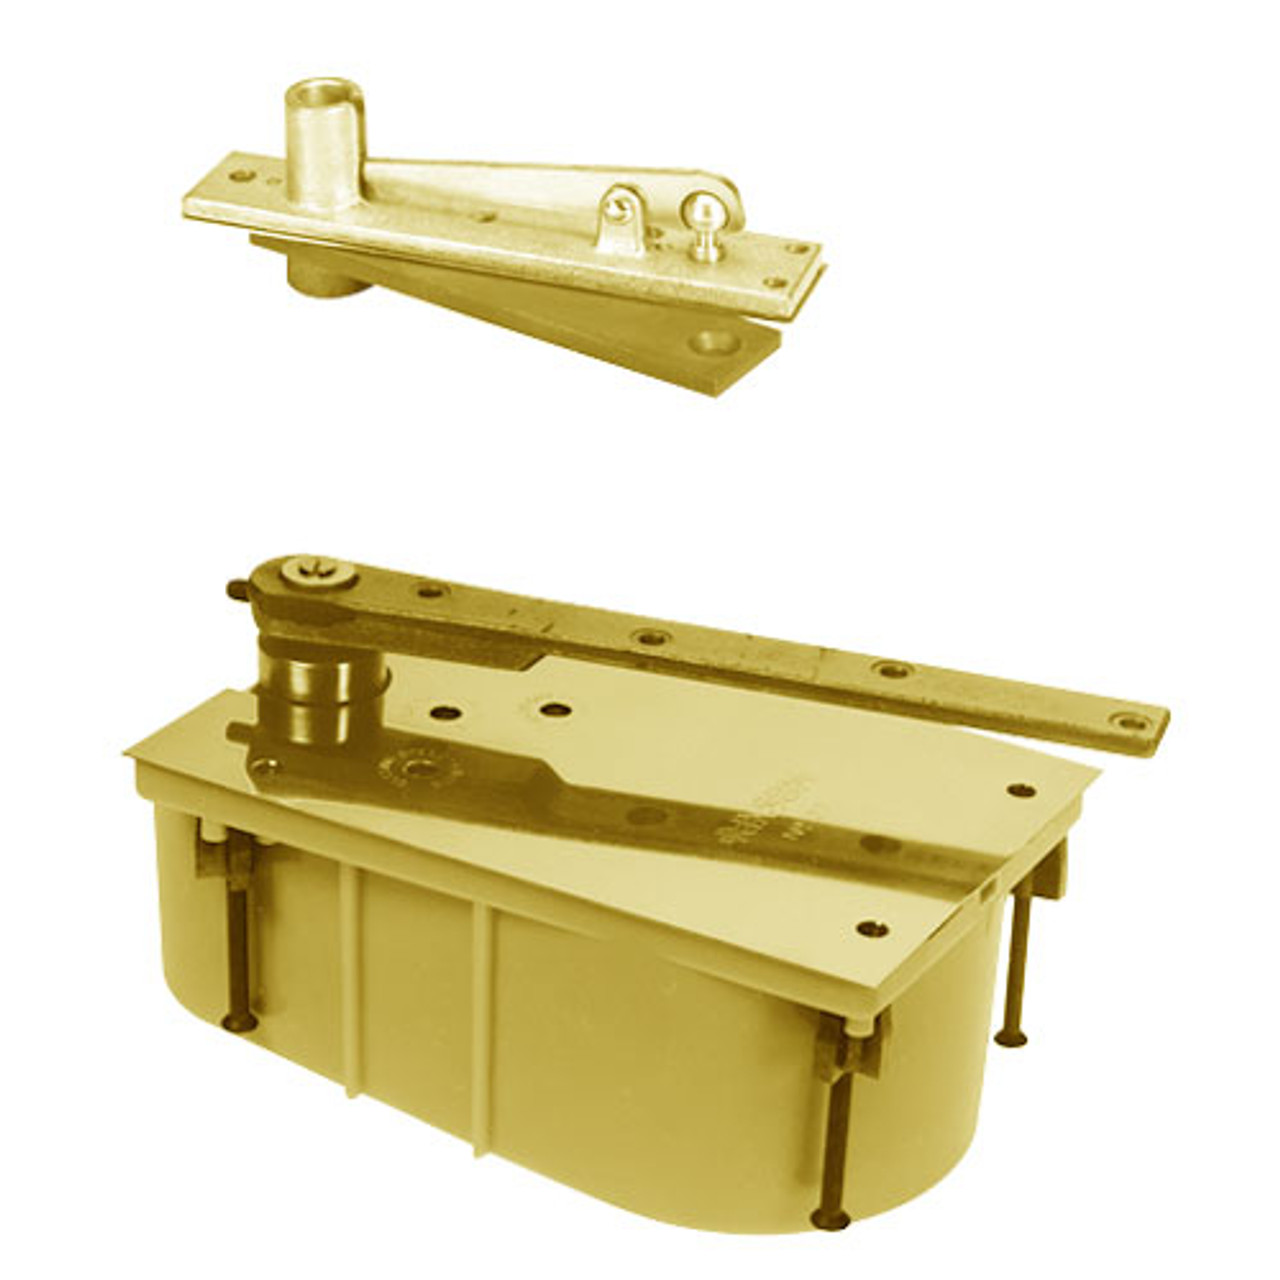 28-90N-554-CWF-RH-605 Rixson 28 Series Heavy Duty Single Acting Center Hung Floor Closer with Concealed Arm in Bright Brass Finish